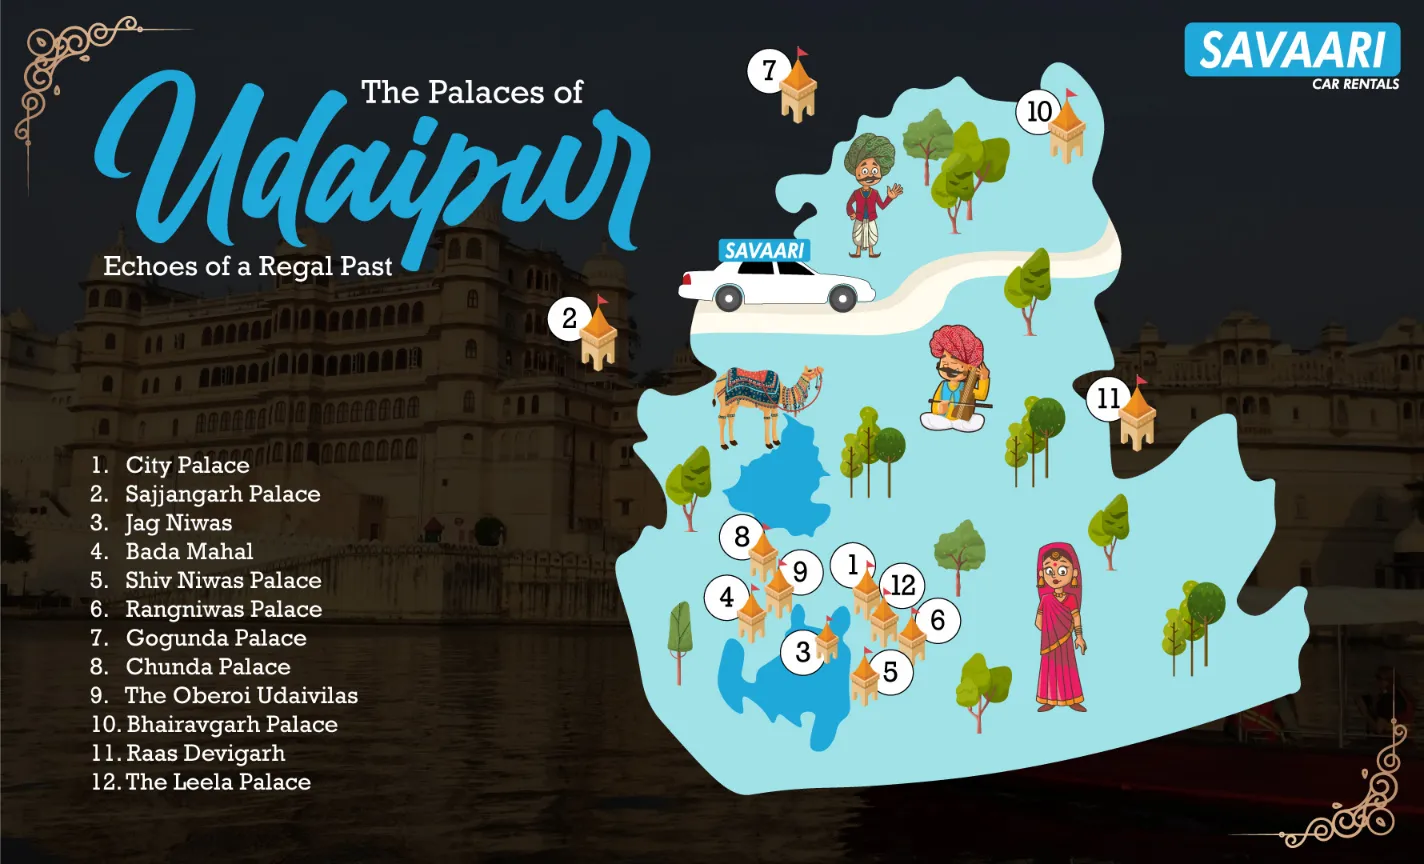 Palaces of Udaipur